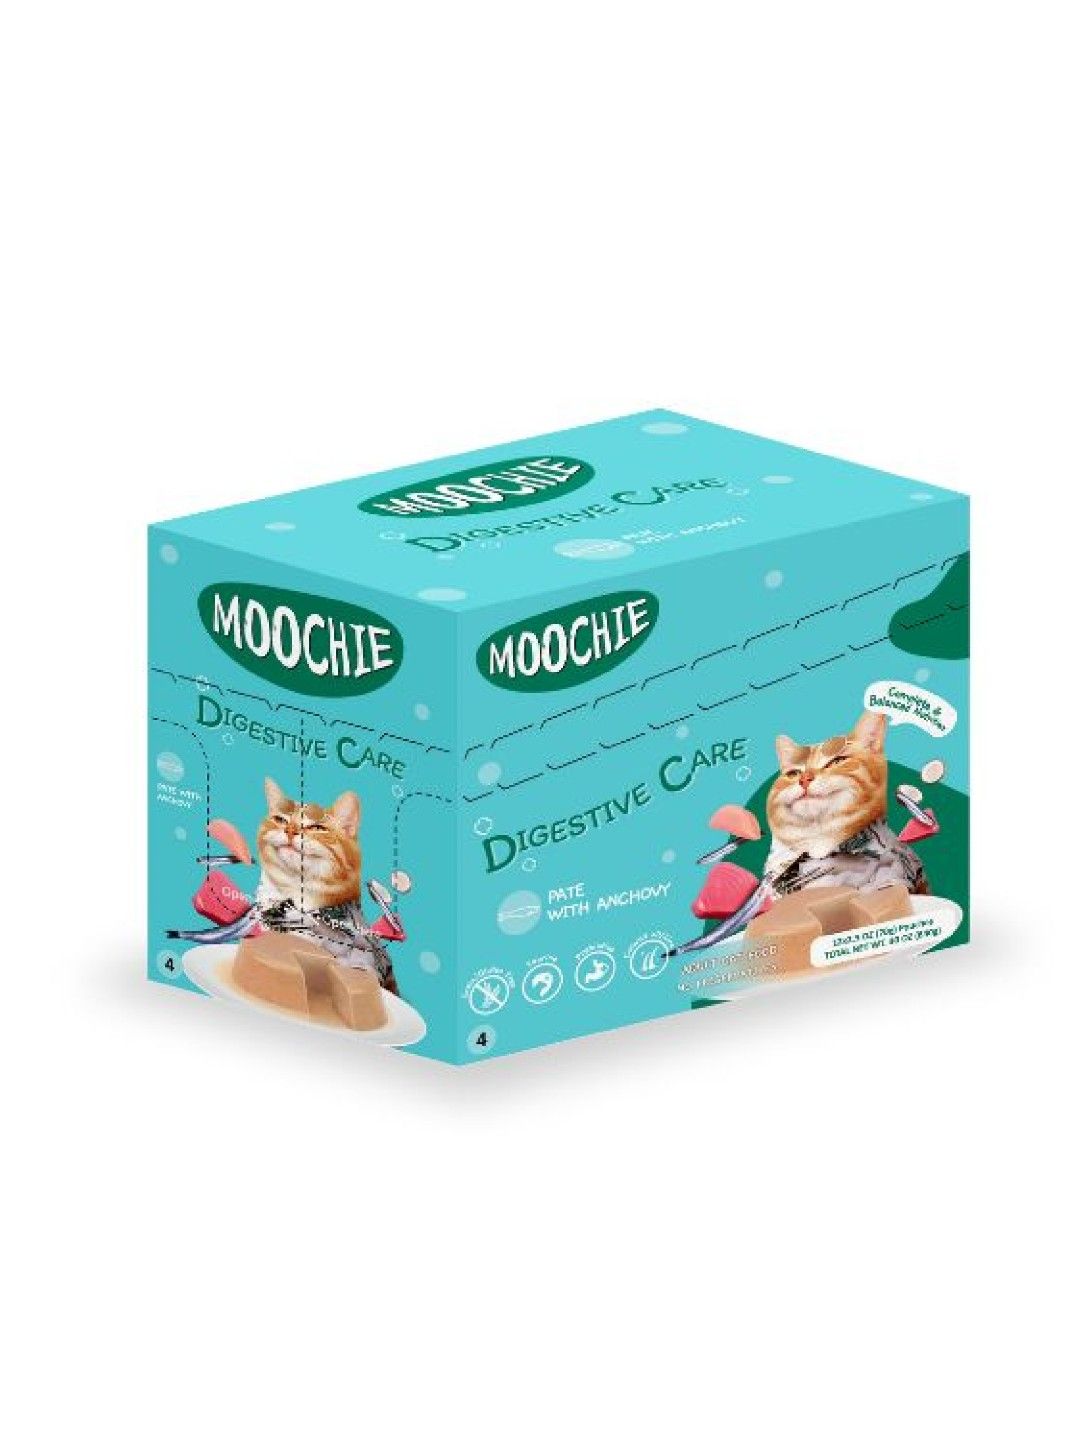 Moochie Cat Food Pate with Anchovy Digestive Care 70g (12pcs)